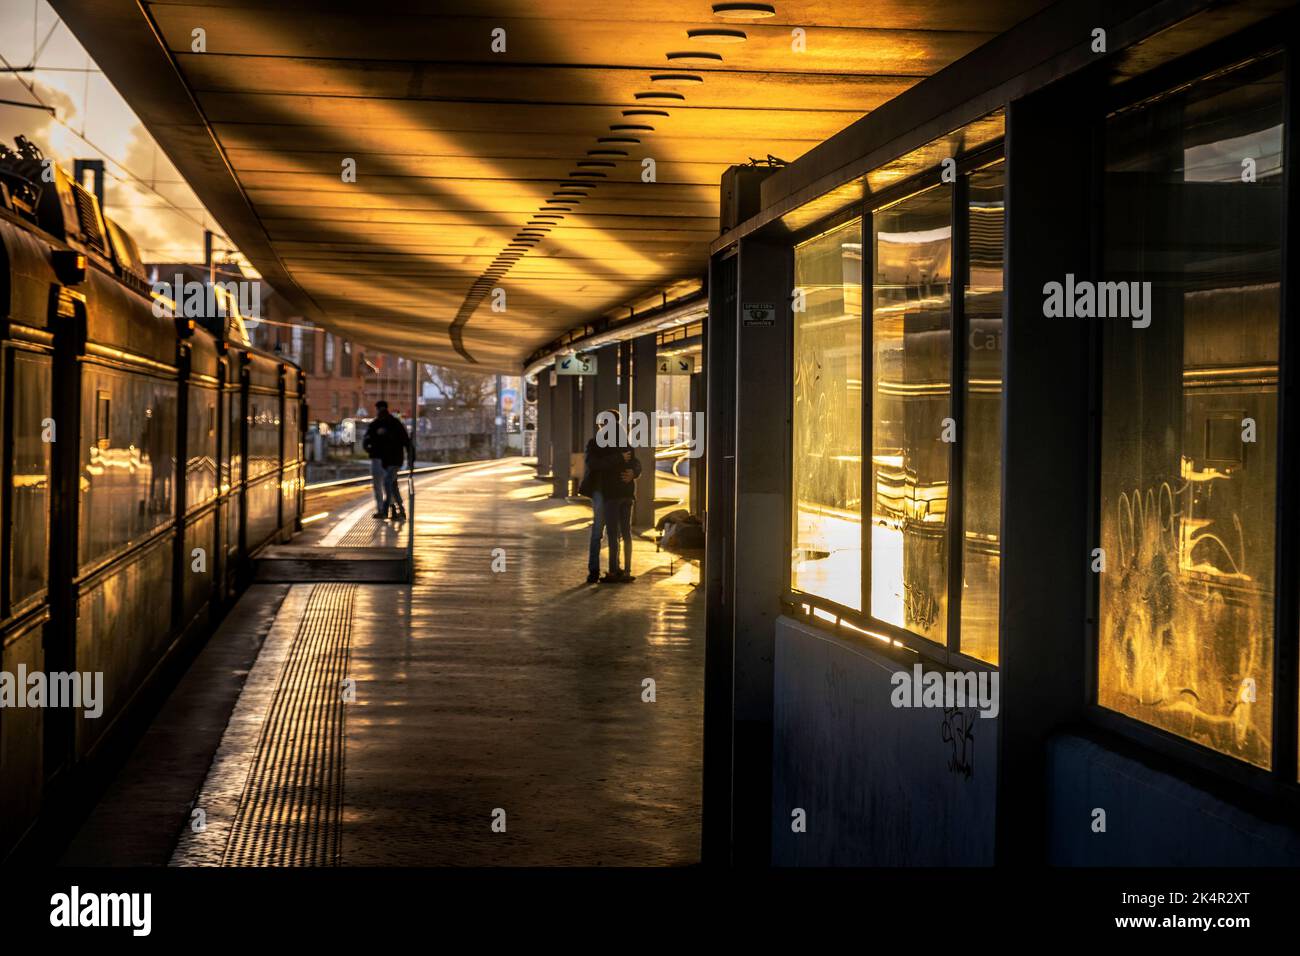 A couple kissing in the evening glow on a train platform in Lisbon, Portugal Stock Photo